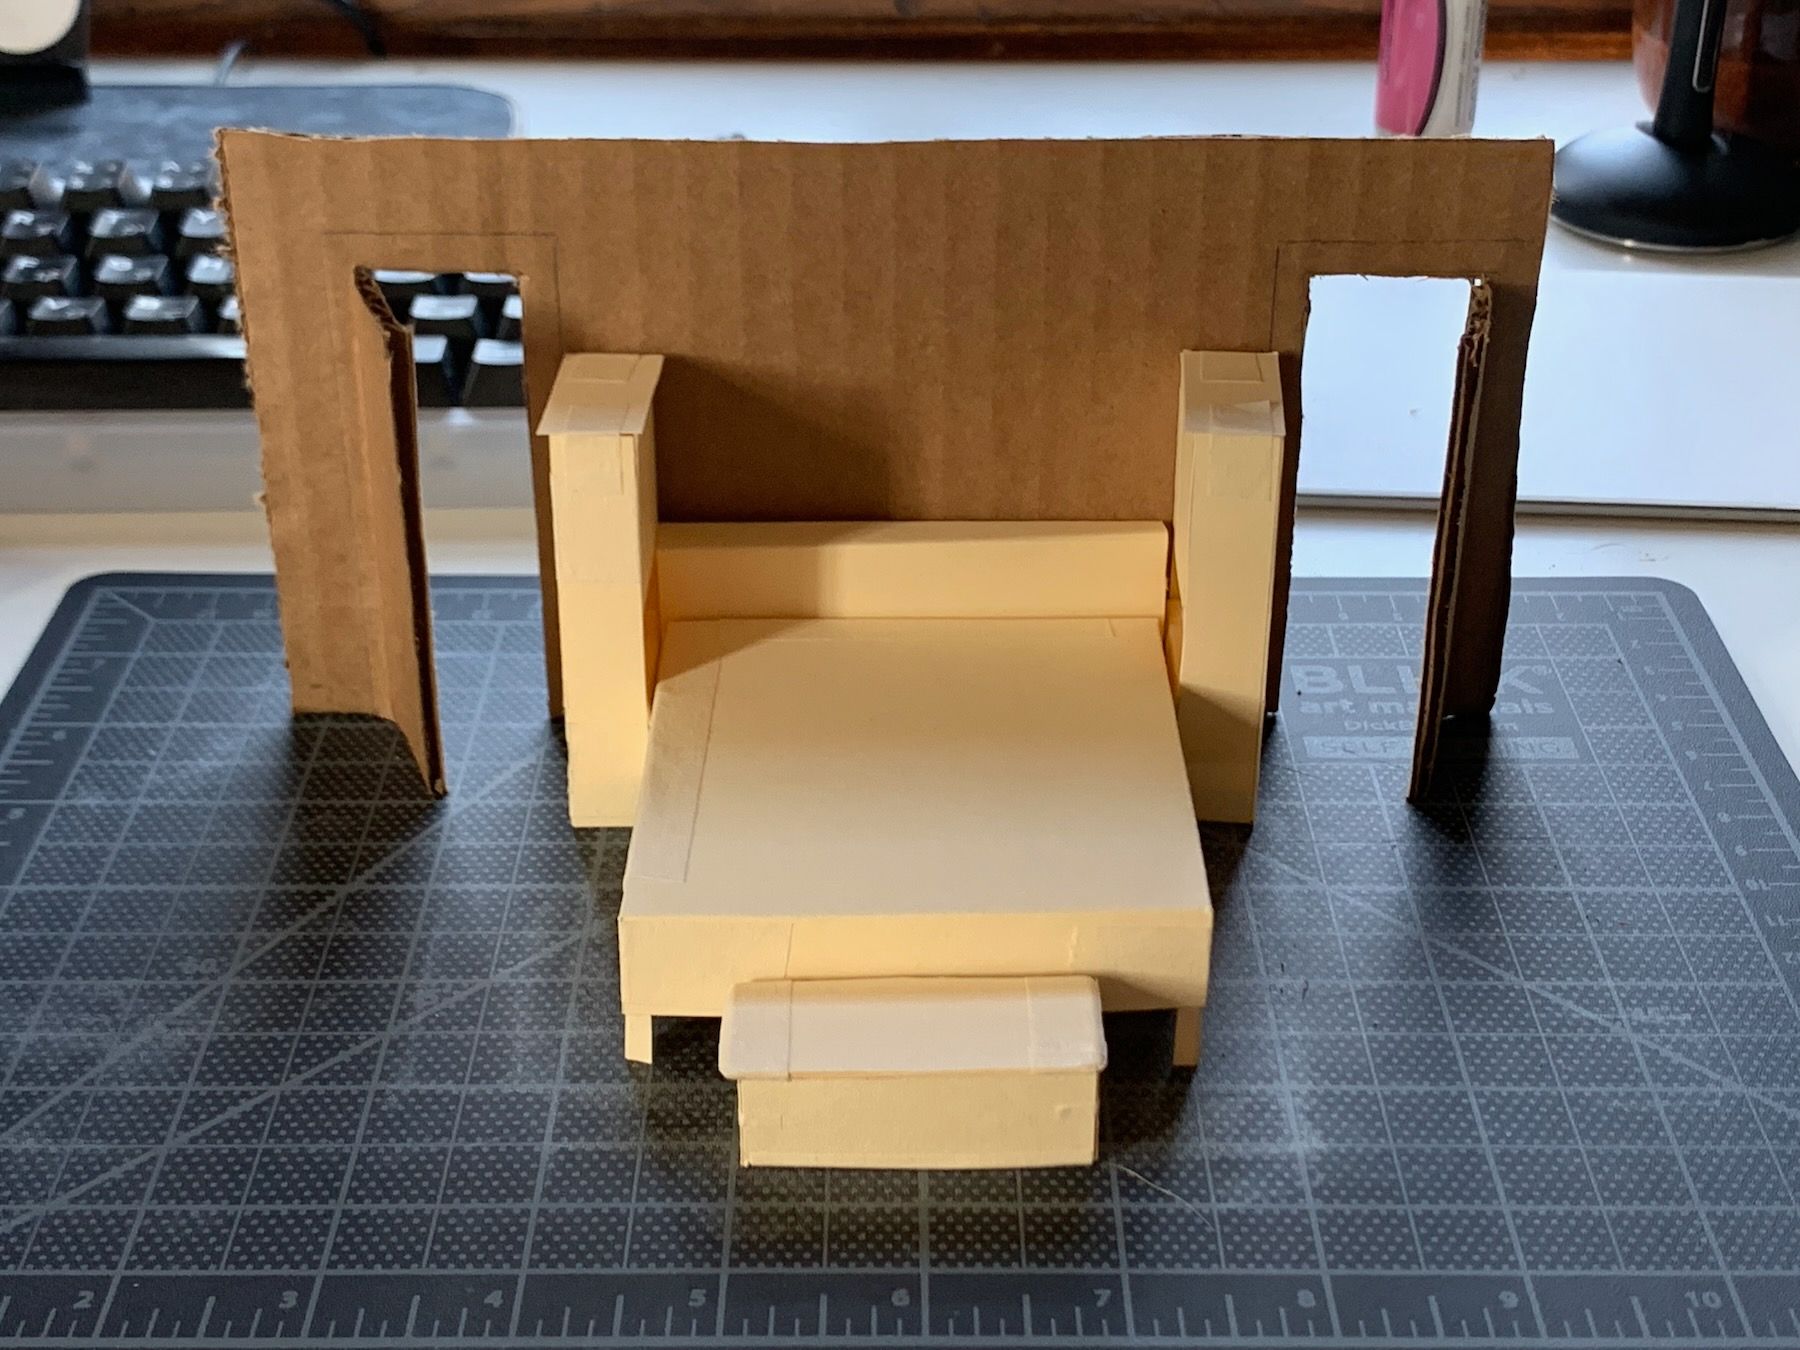 Scale model, furniture made of manilla folder stock and back wall and doors made of cardboard. Standing on a black cutting mat on desk, keyboard and mousepad in background. Elevation view toward wall from beyond foot of bed.